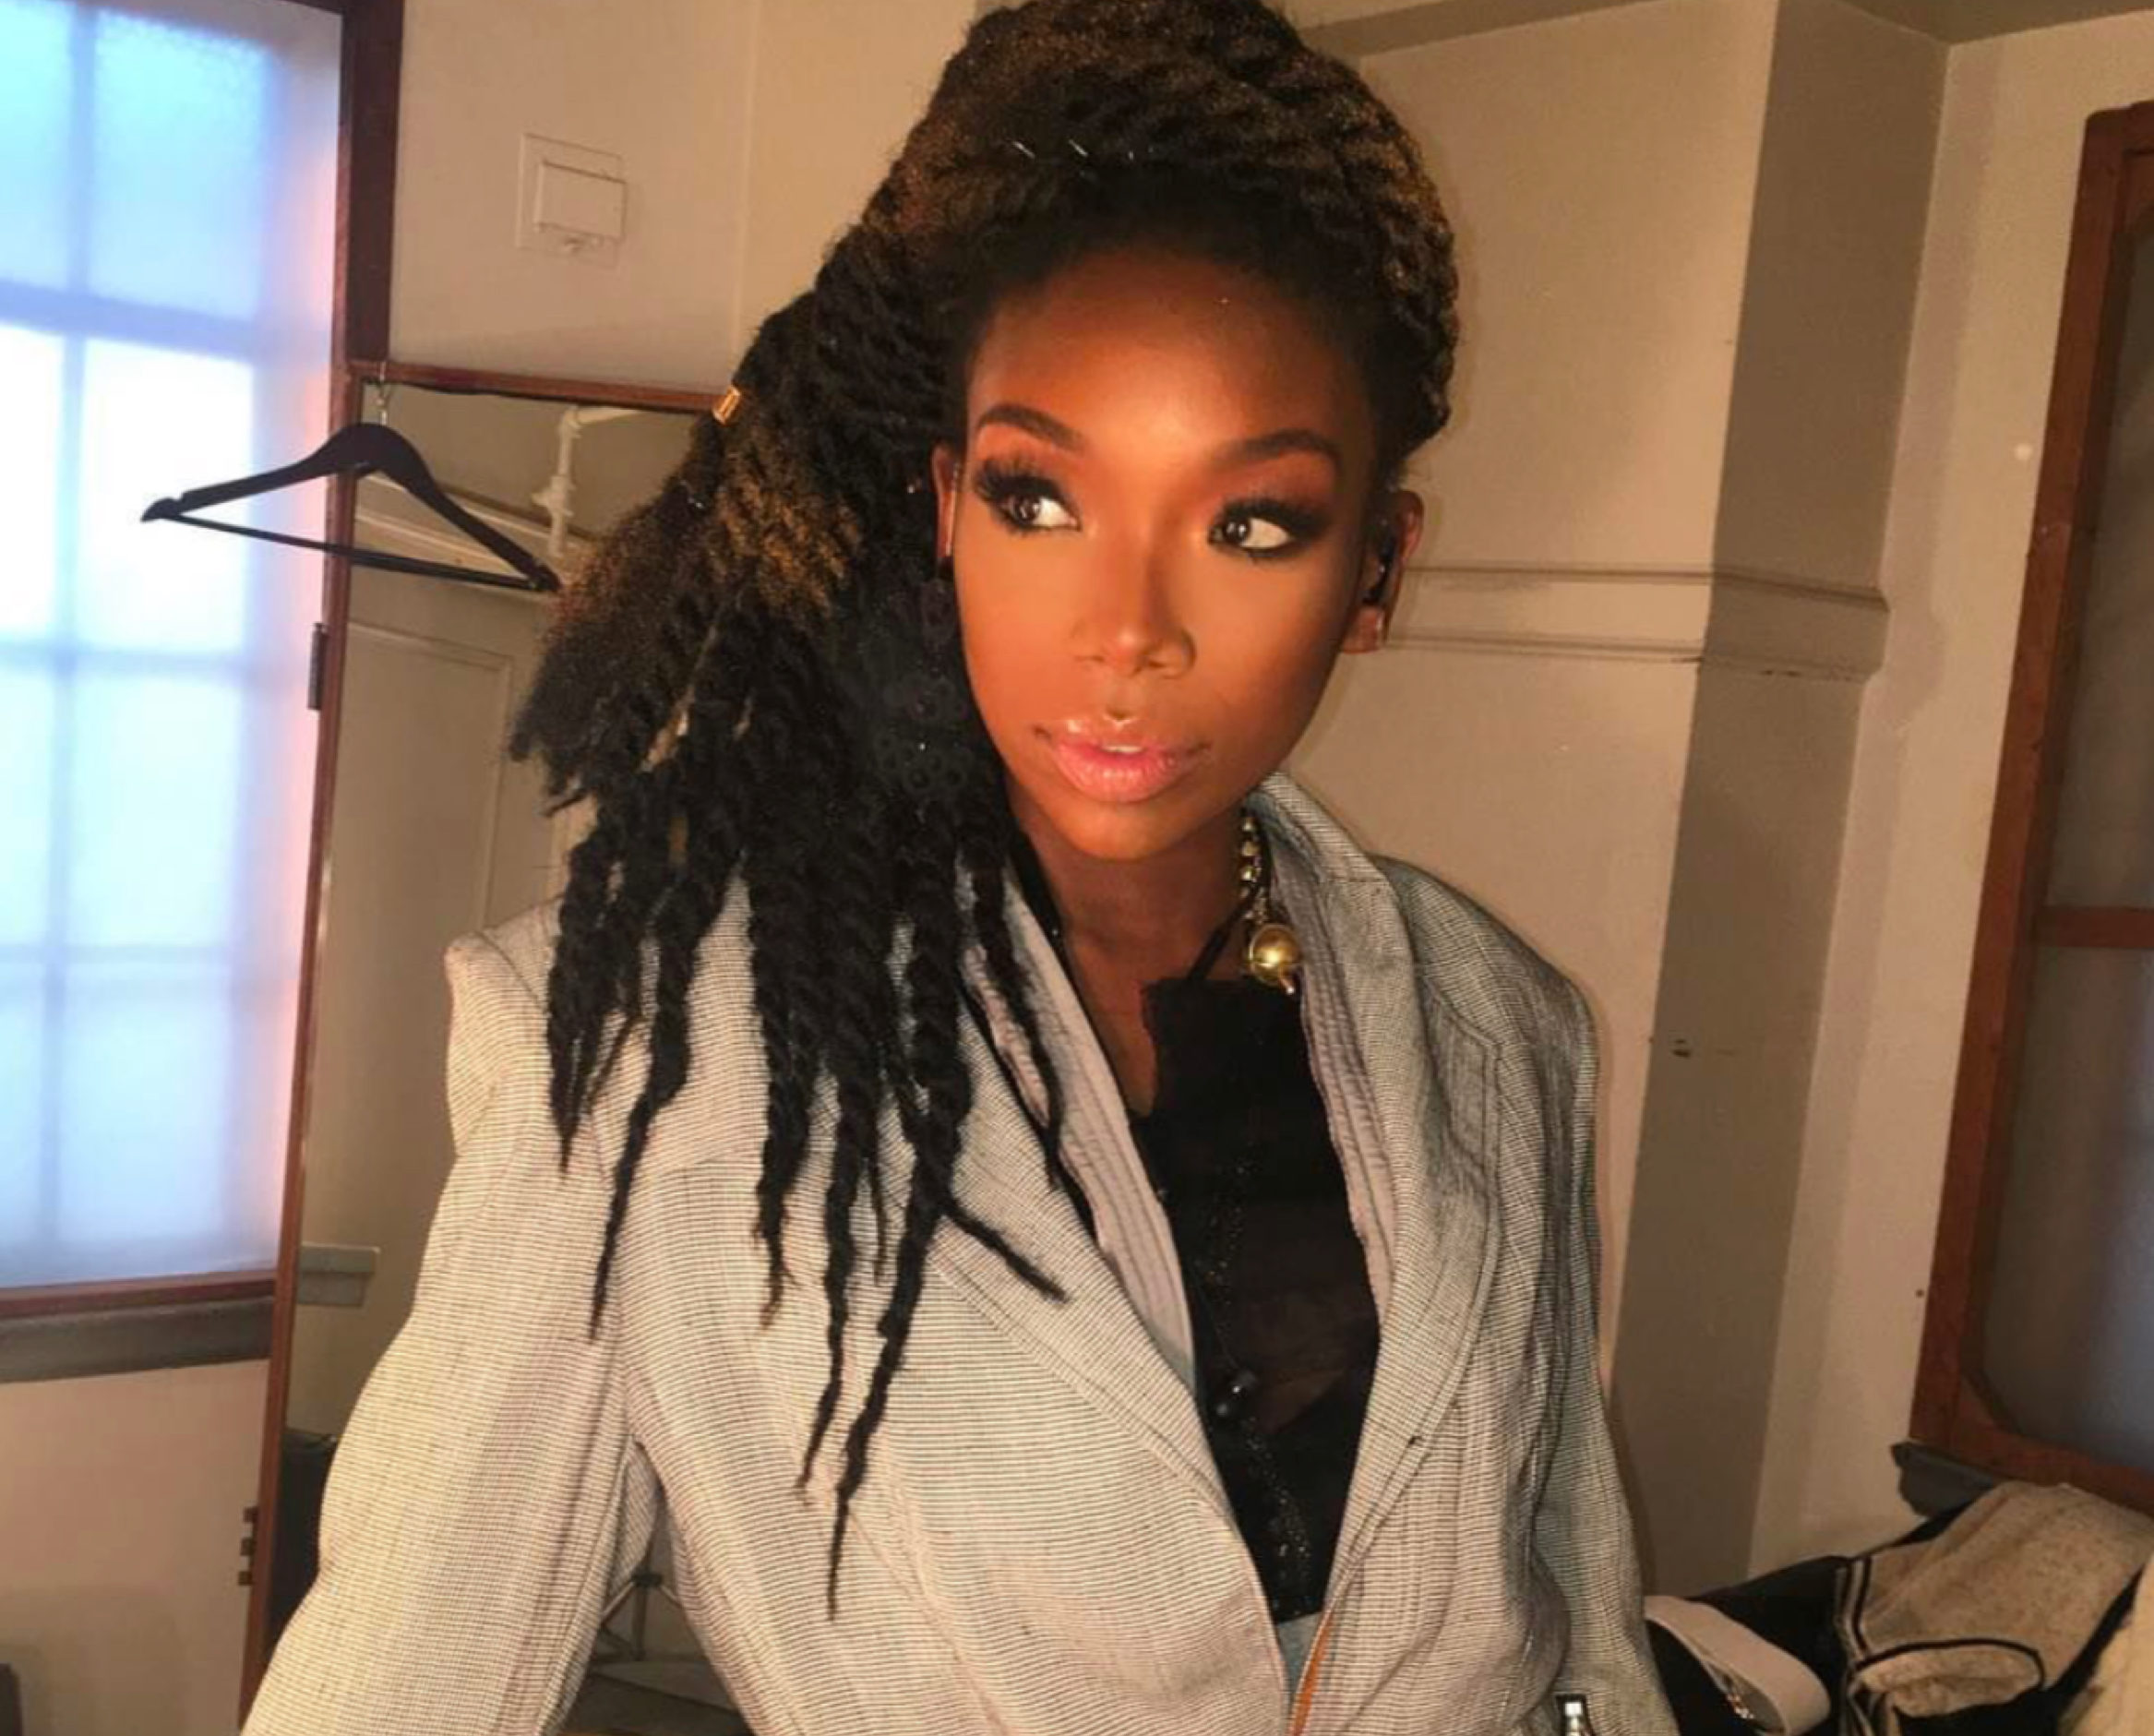 Is pregnant by brandy who 'RHOD' star